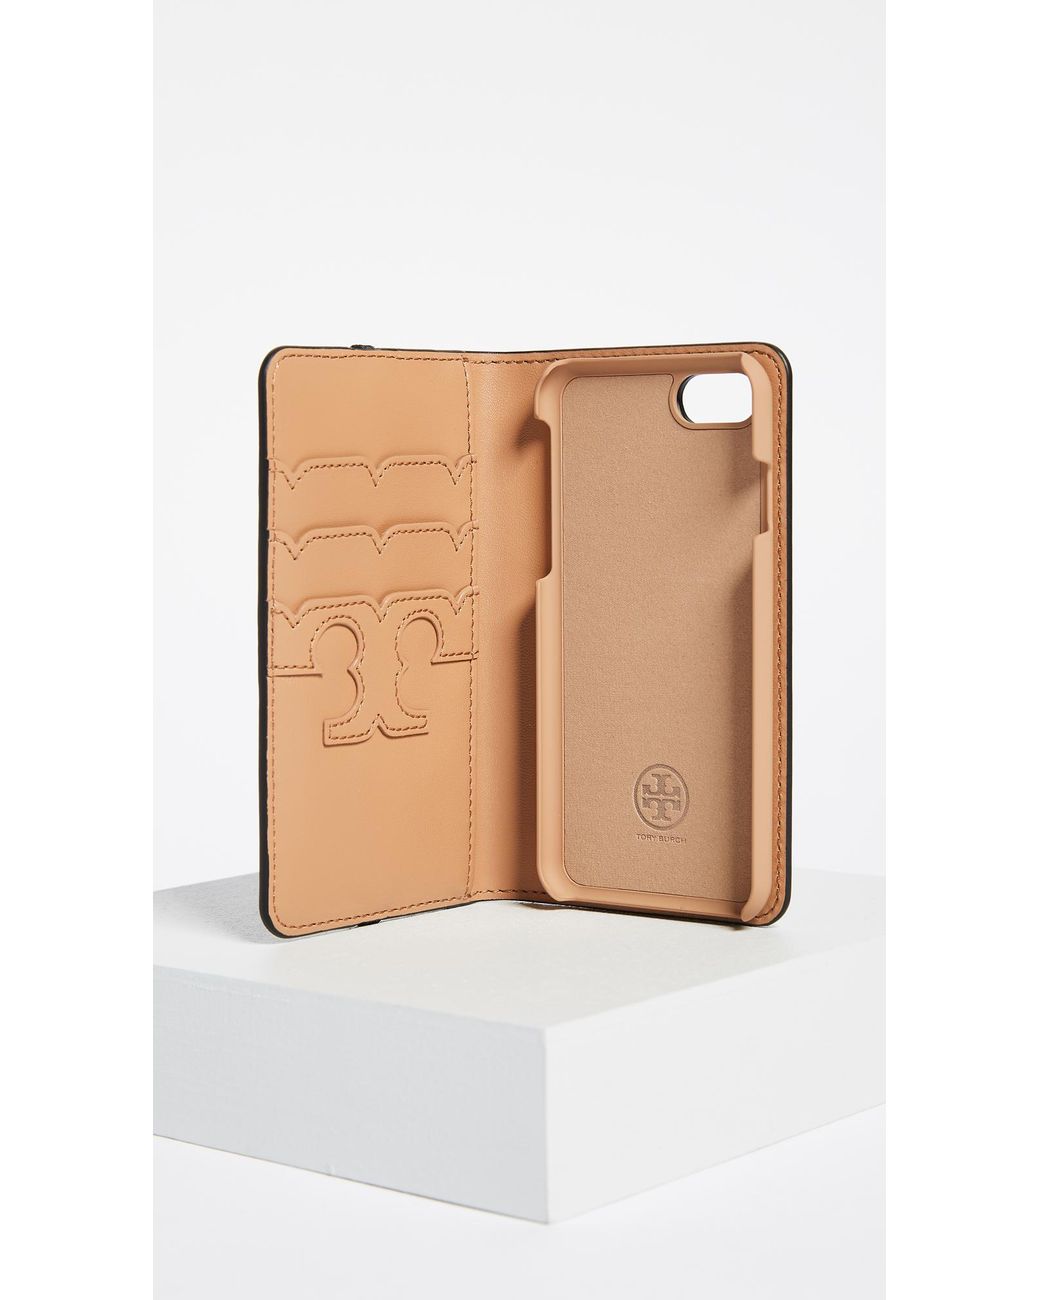 Tory Burch Parker Leather Folio Iphone 7 Case in Black | Lyst